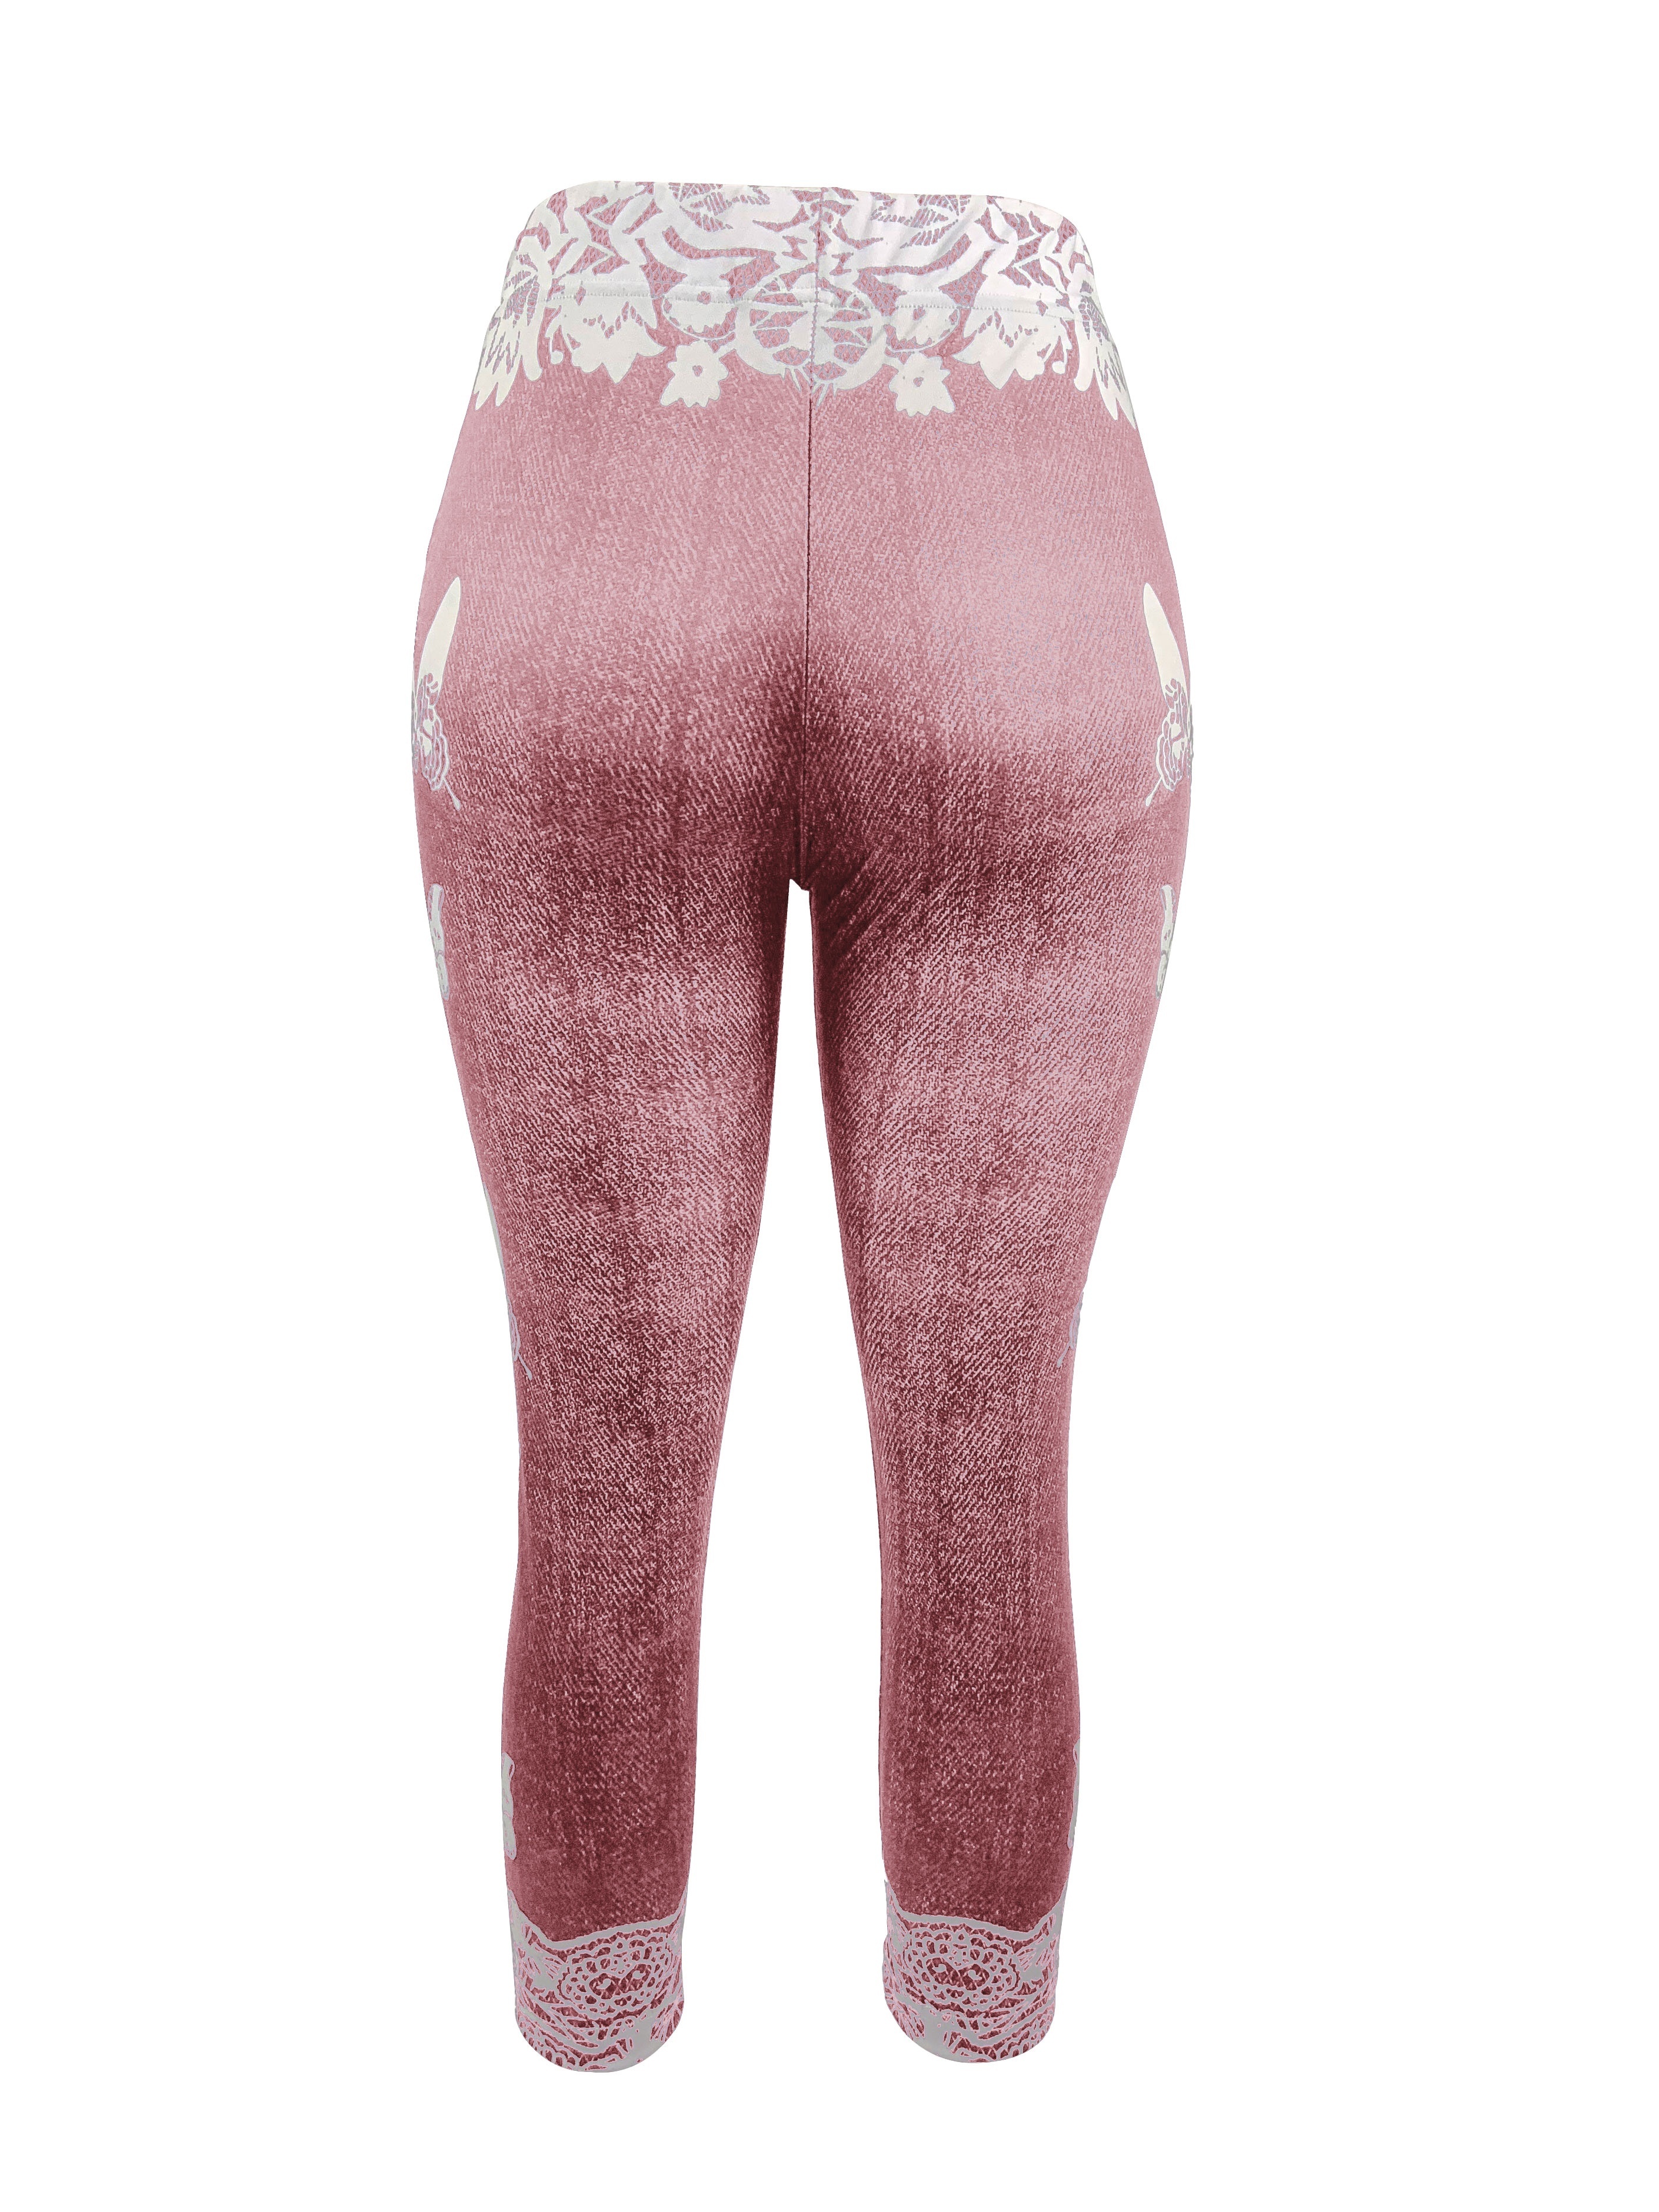 Butterfly Insect Print Yoga Trousers - Women Adult High Waist